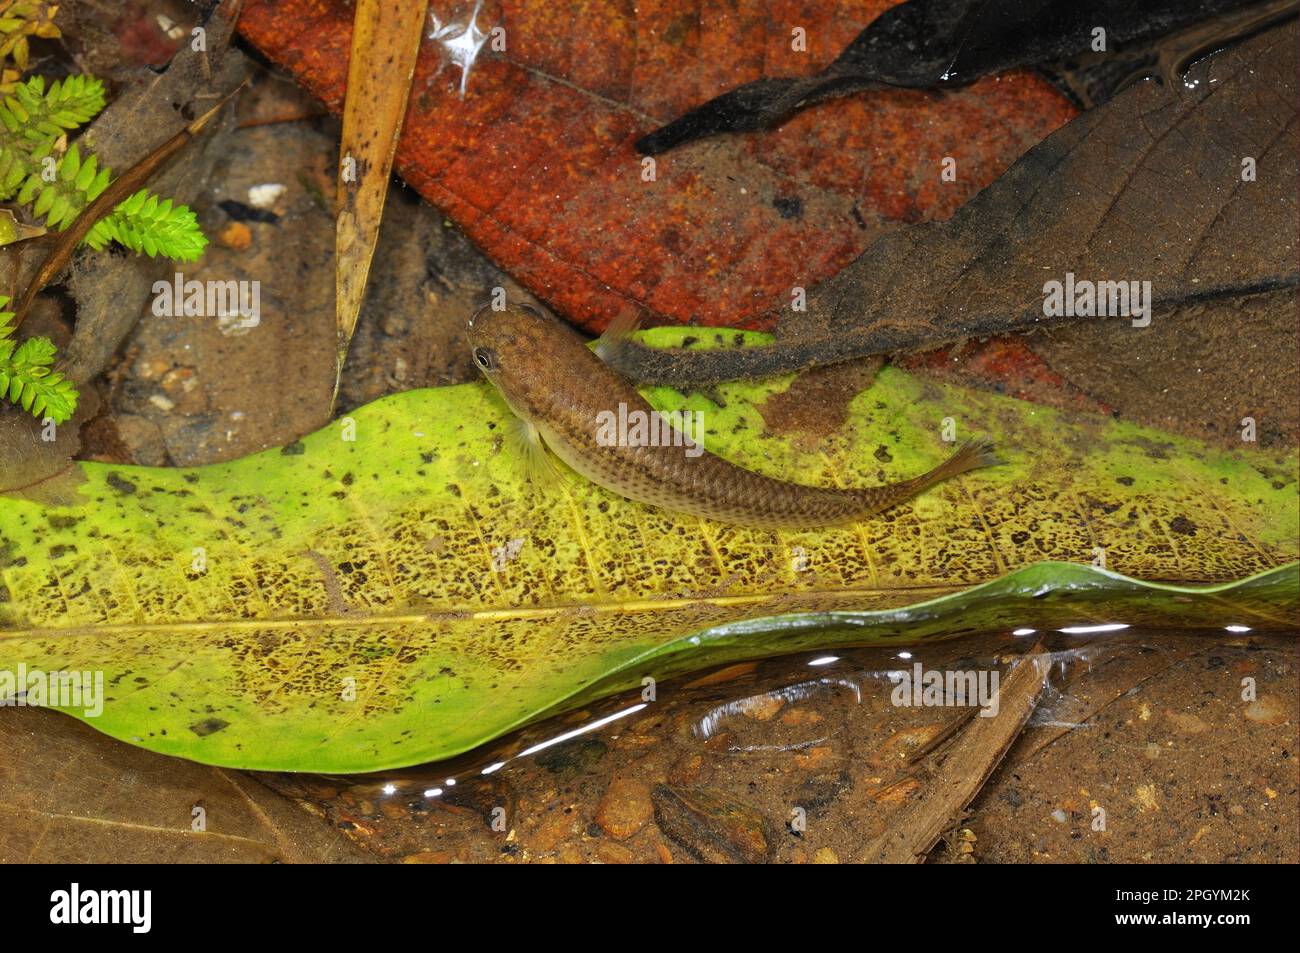 Adult Harts Rivulus (Rivulus hartii), swimming among fallen leaves in shallow mountain stream, Trinidad, Trinidad and Tobago Stock Photo